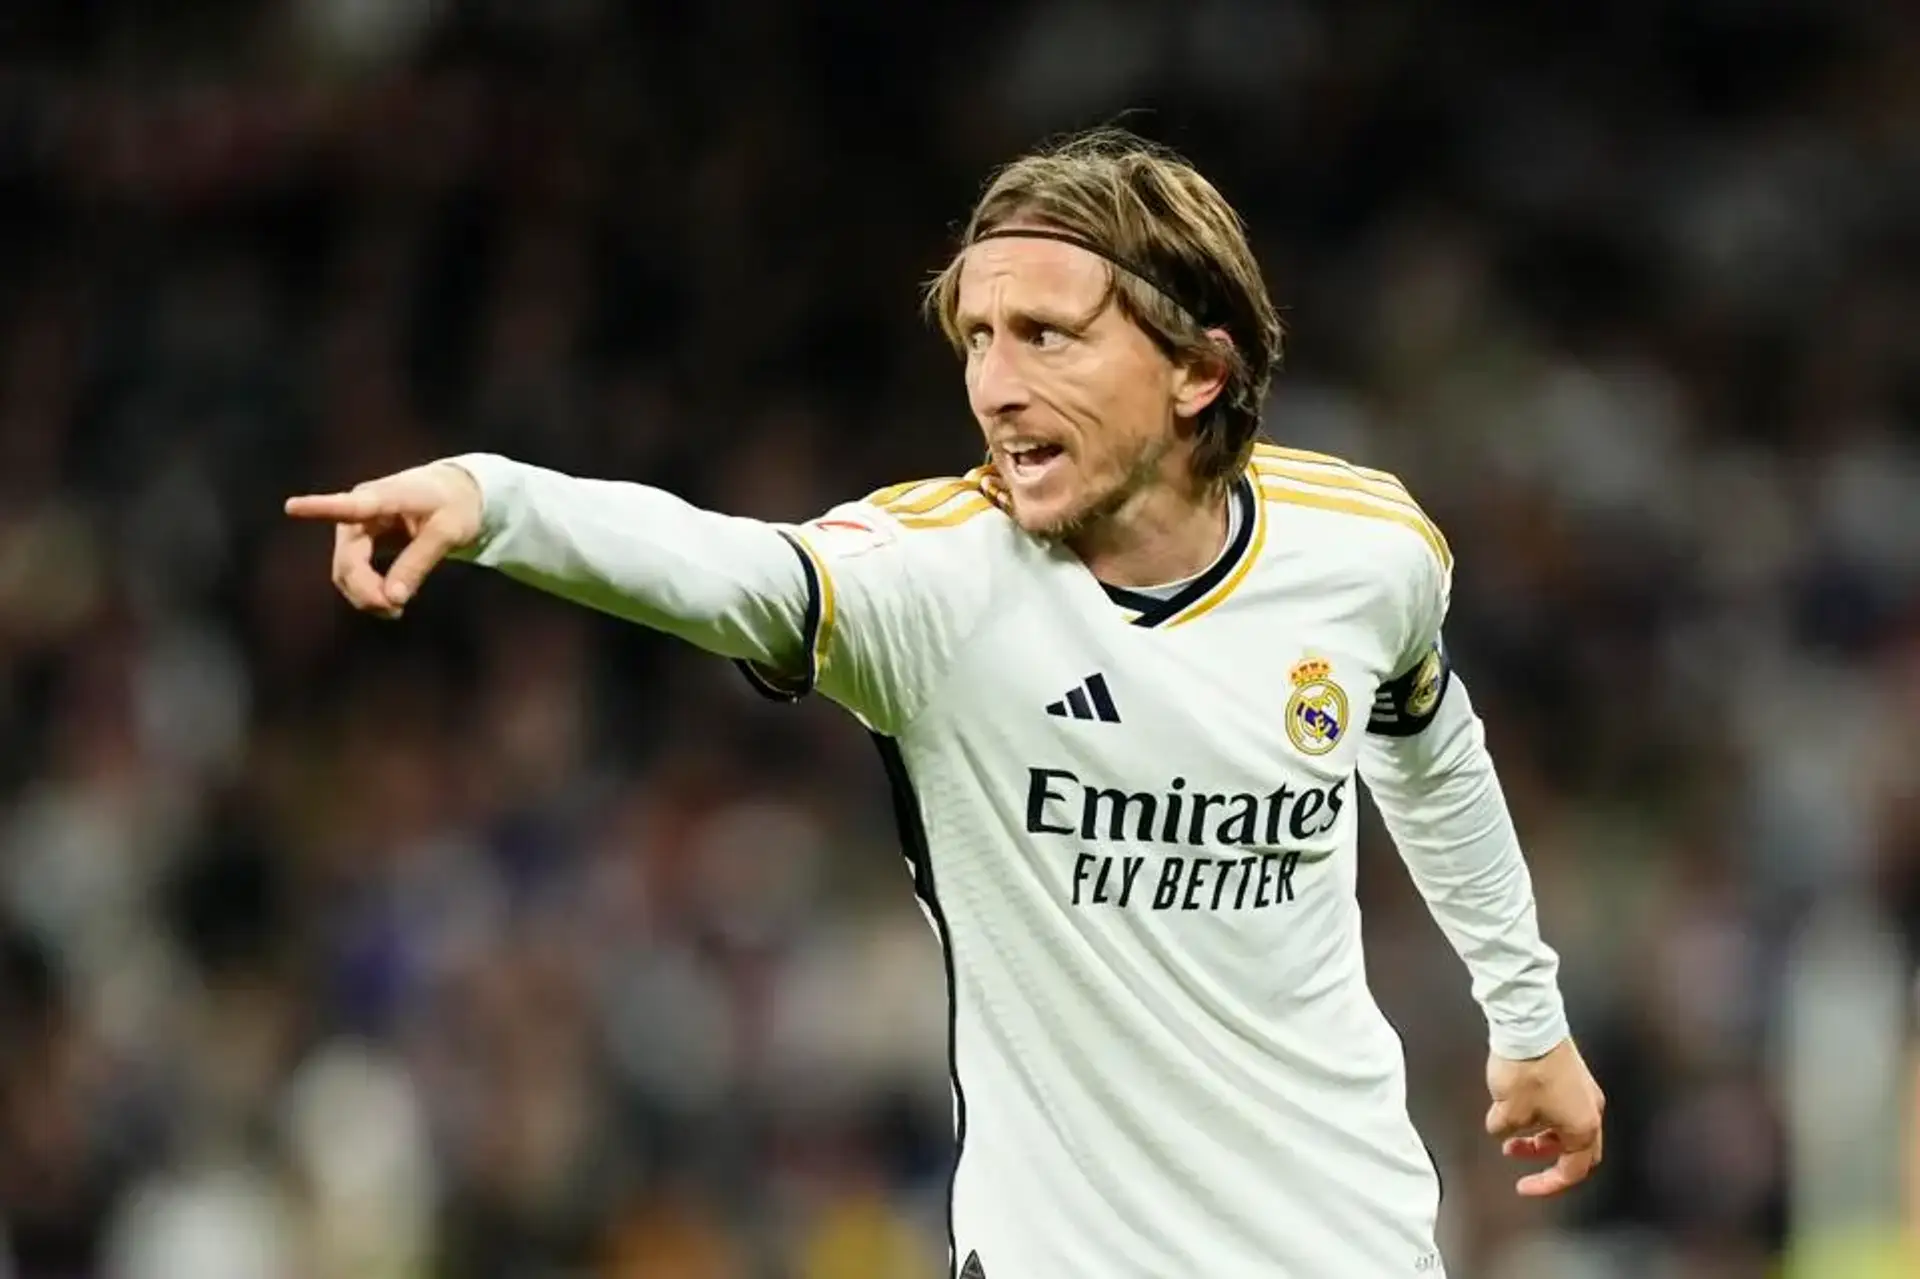 Modric's Future at Real Madrid in Doubt as Midfielder Rejects New Contract